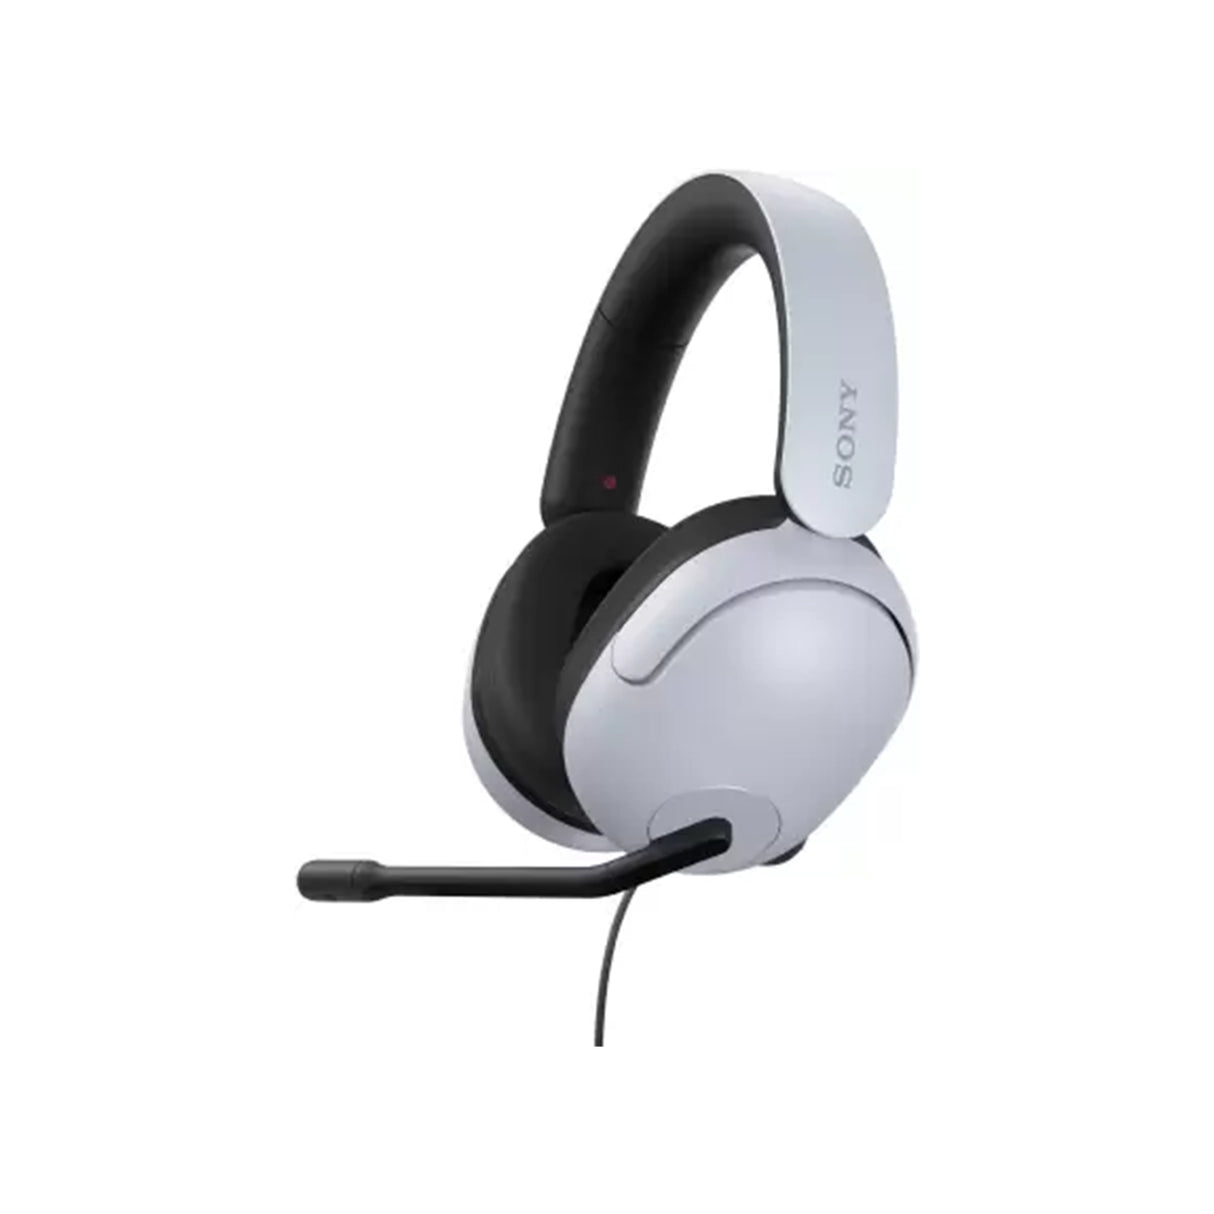 Sony MDR-G300 -  360 Spatial Sound Wired Gaming Headphones (Mobile, Laptop, PS5 Compatible)